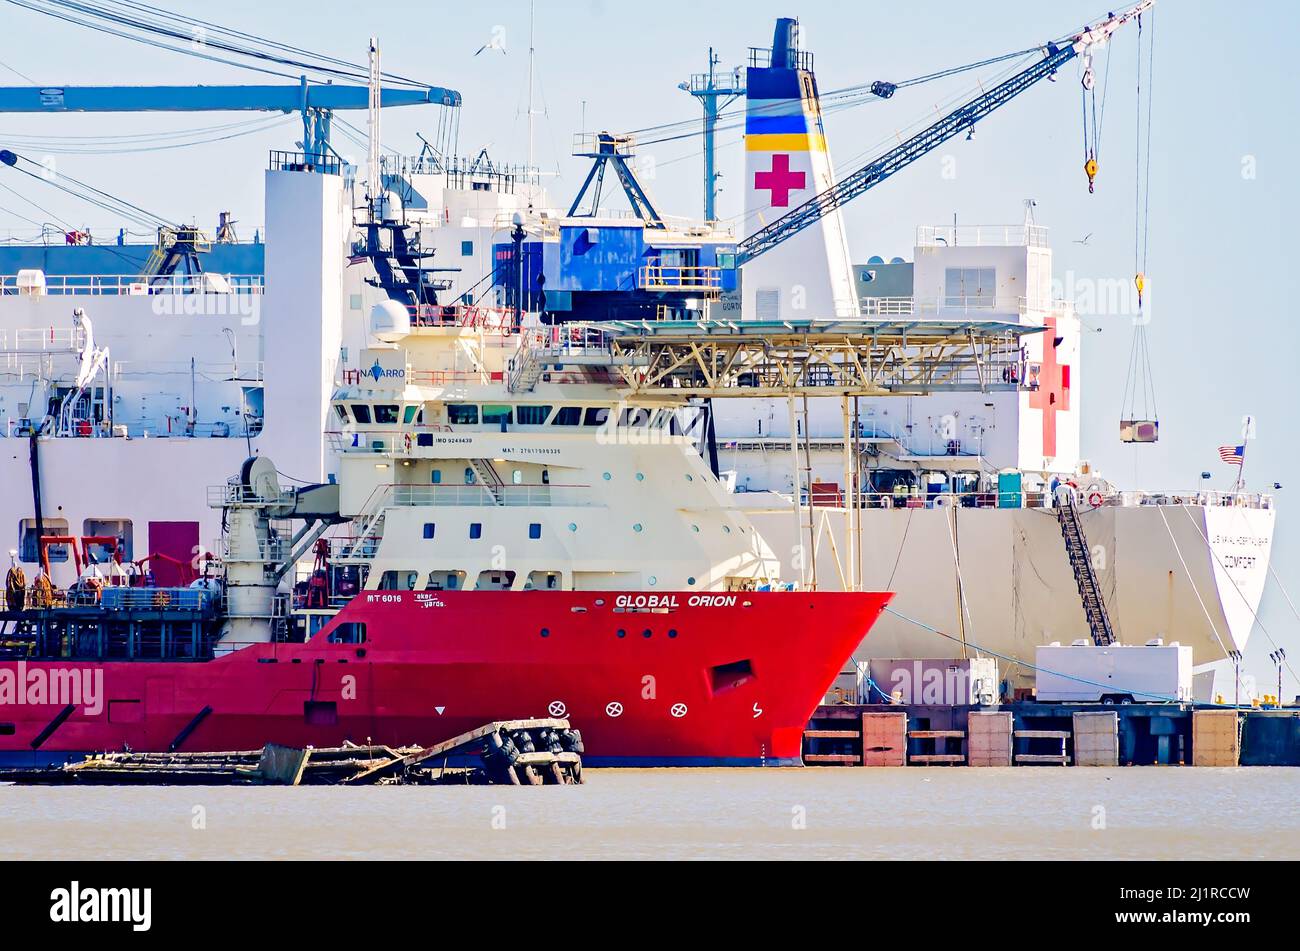 The Global Orion offshore supply vessel is docked alongside the USNS Comfort Navy hospital ship at Alabama Shipyard, March 25, 2022, in Mobile, Alabam Stock Photo